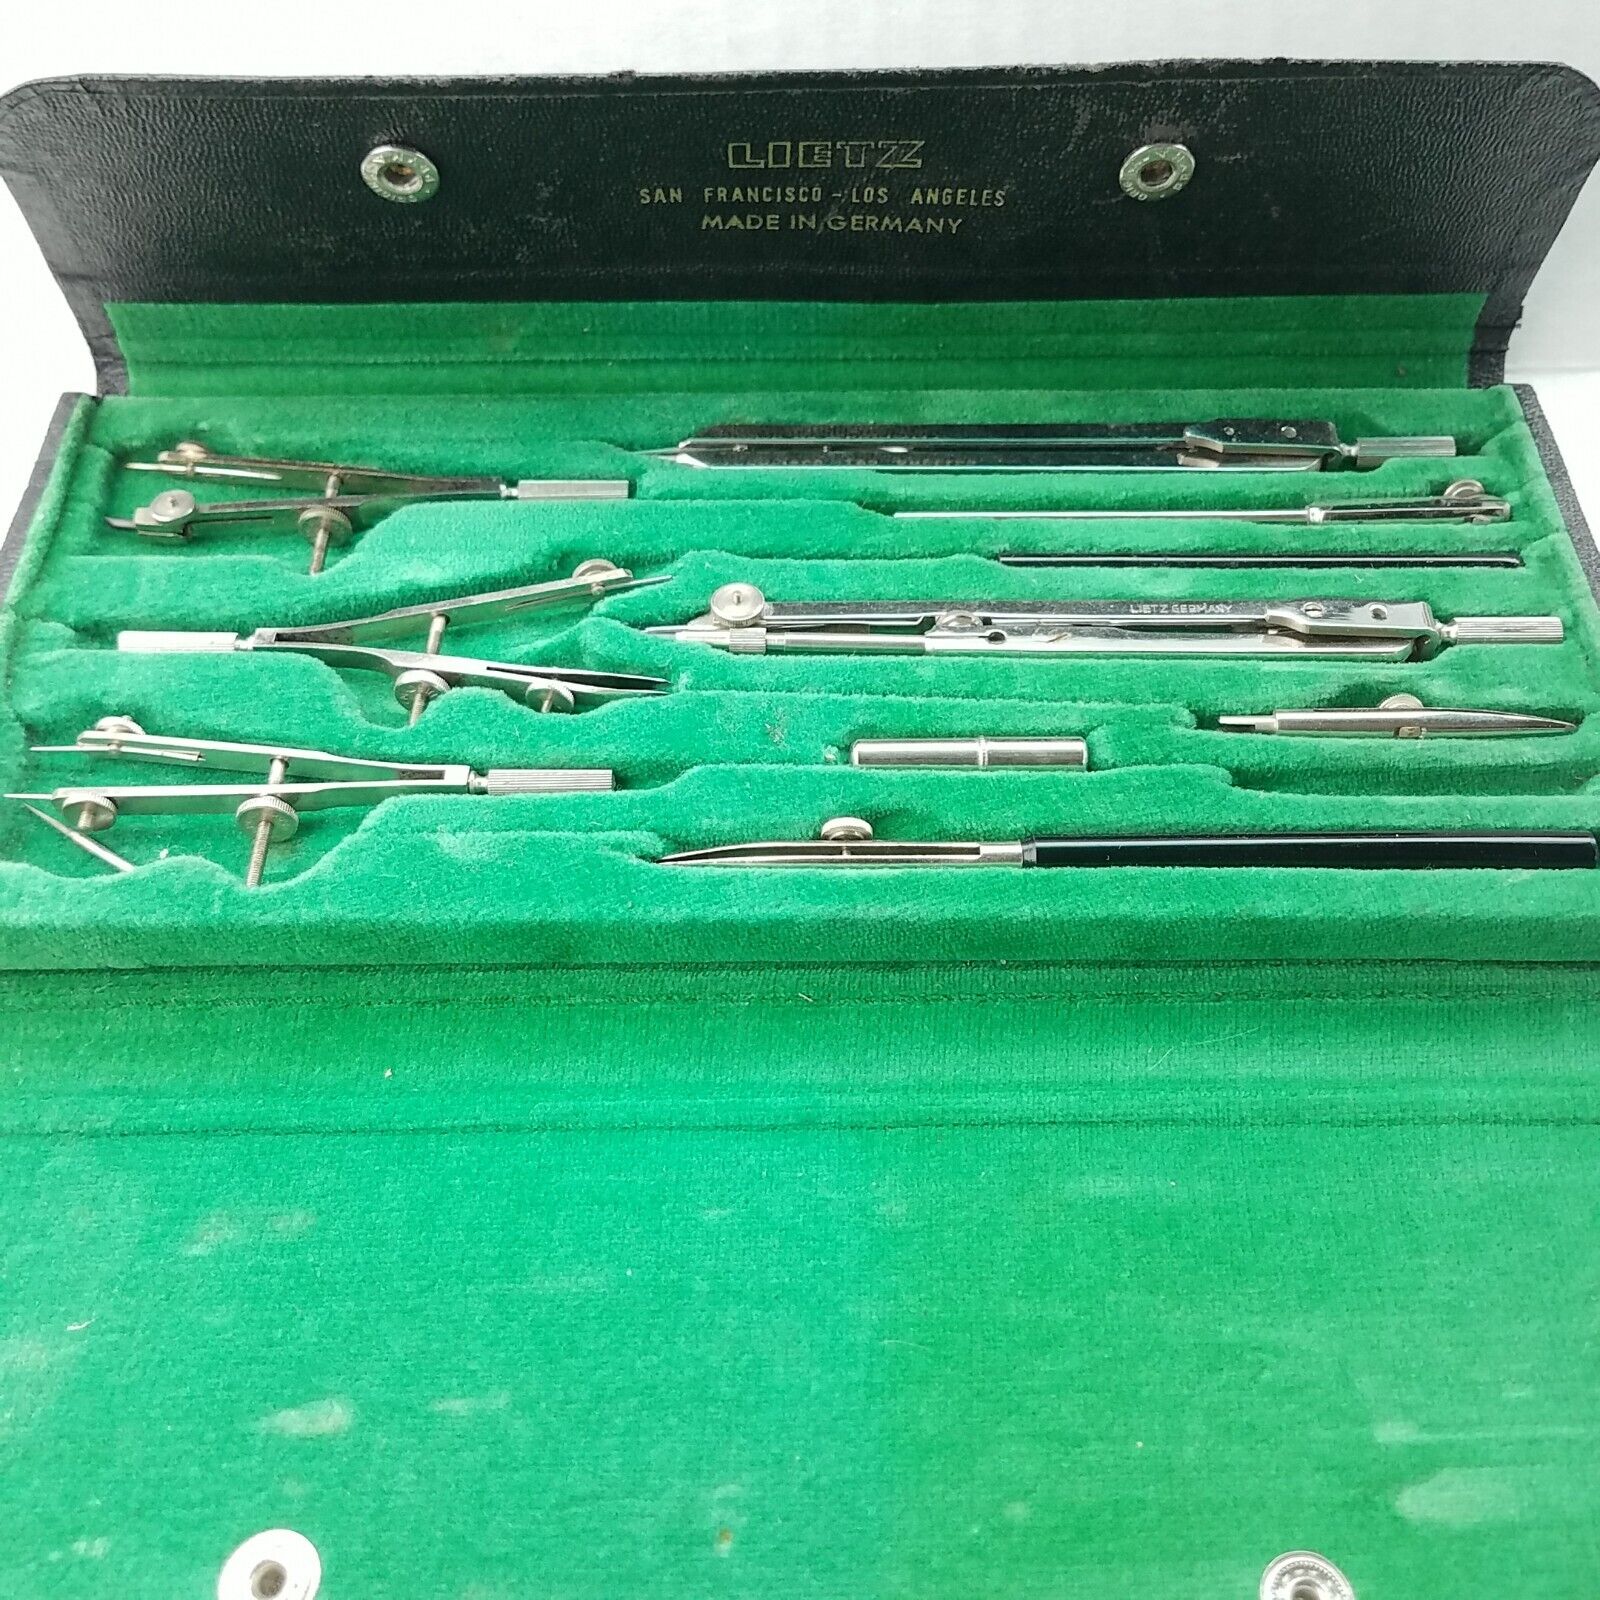 Lietz Model 1969 Dividers Drafting Tools Set With Leather Storage Case Germany